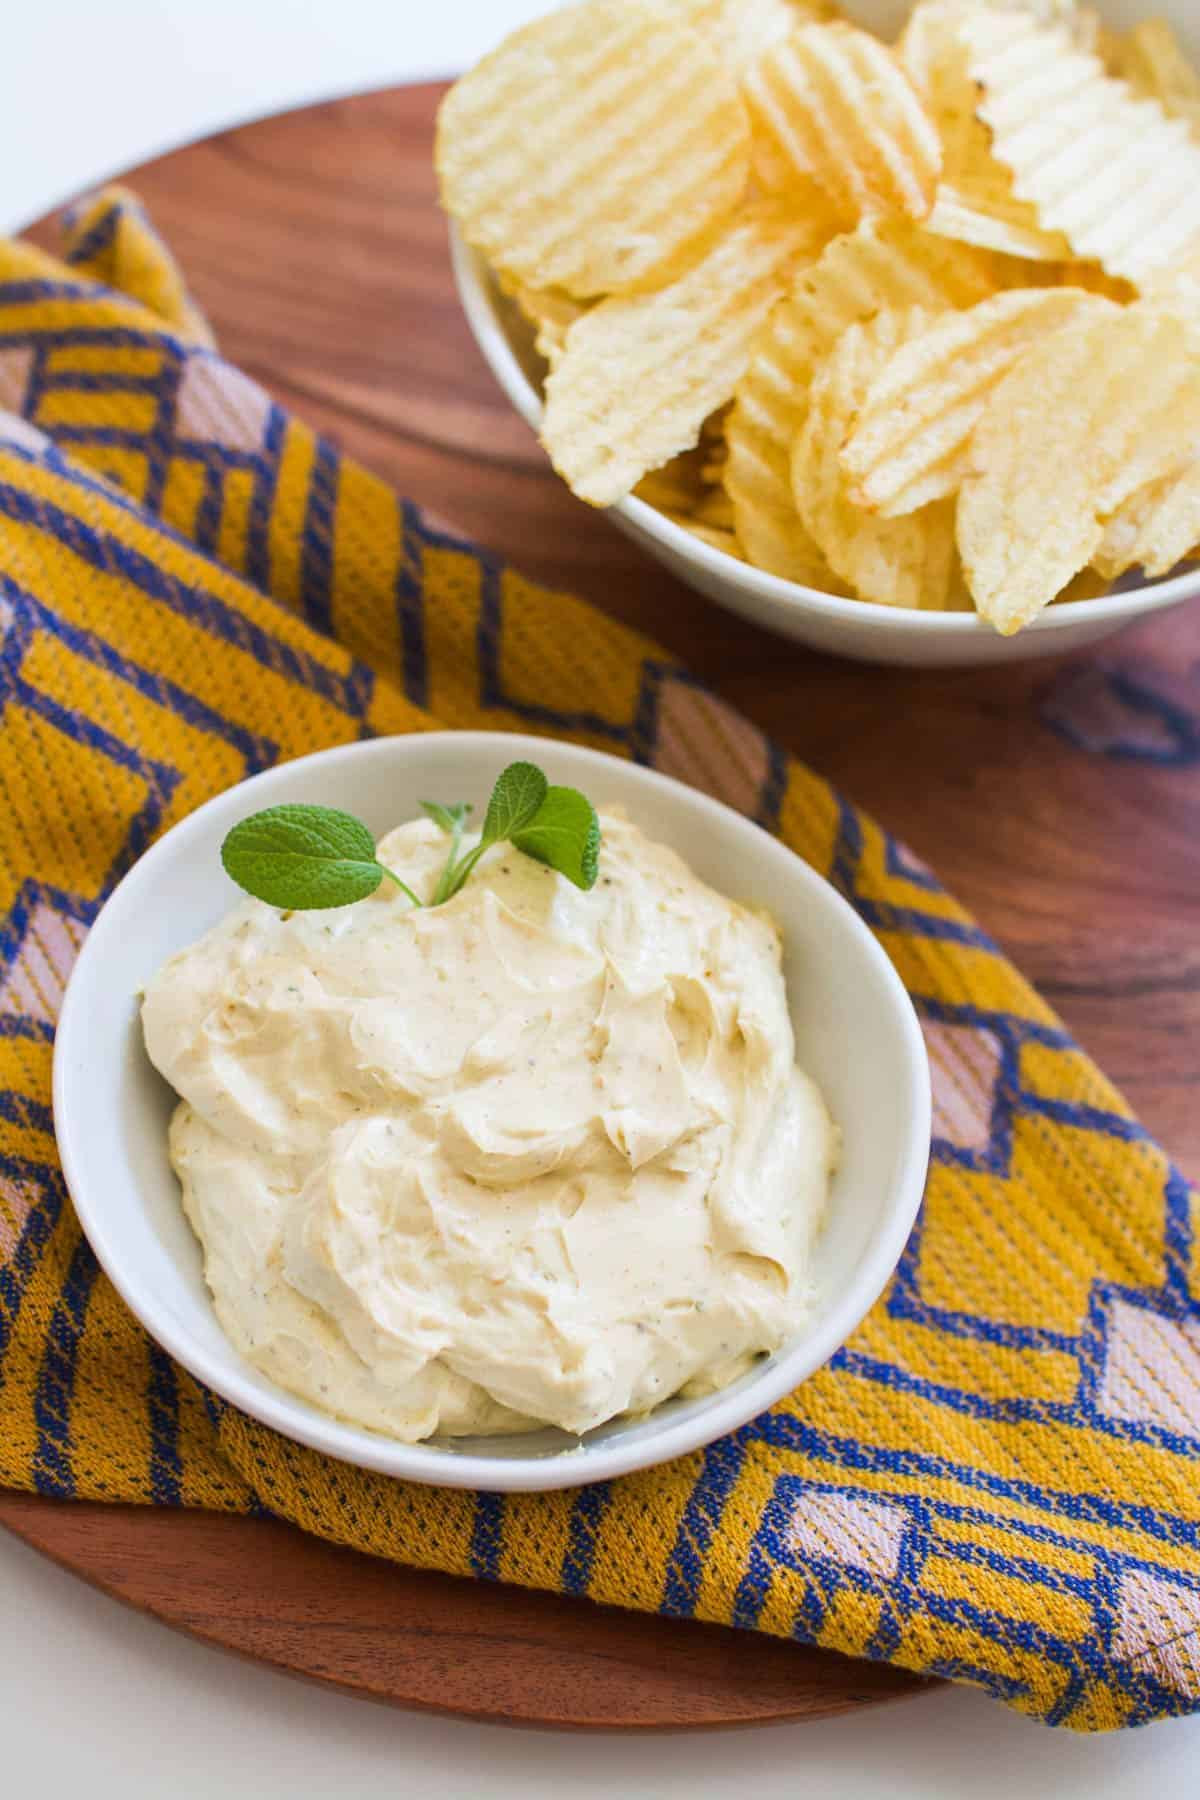 Creamy old bay chip dip in a white bowl.